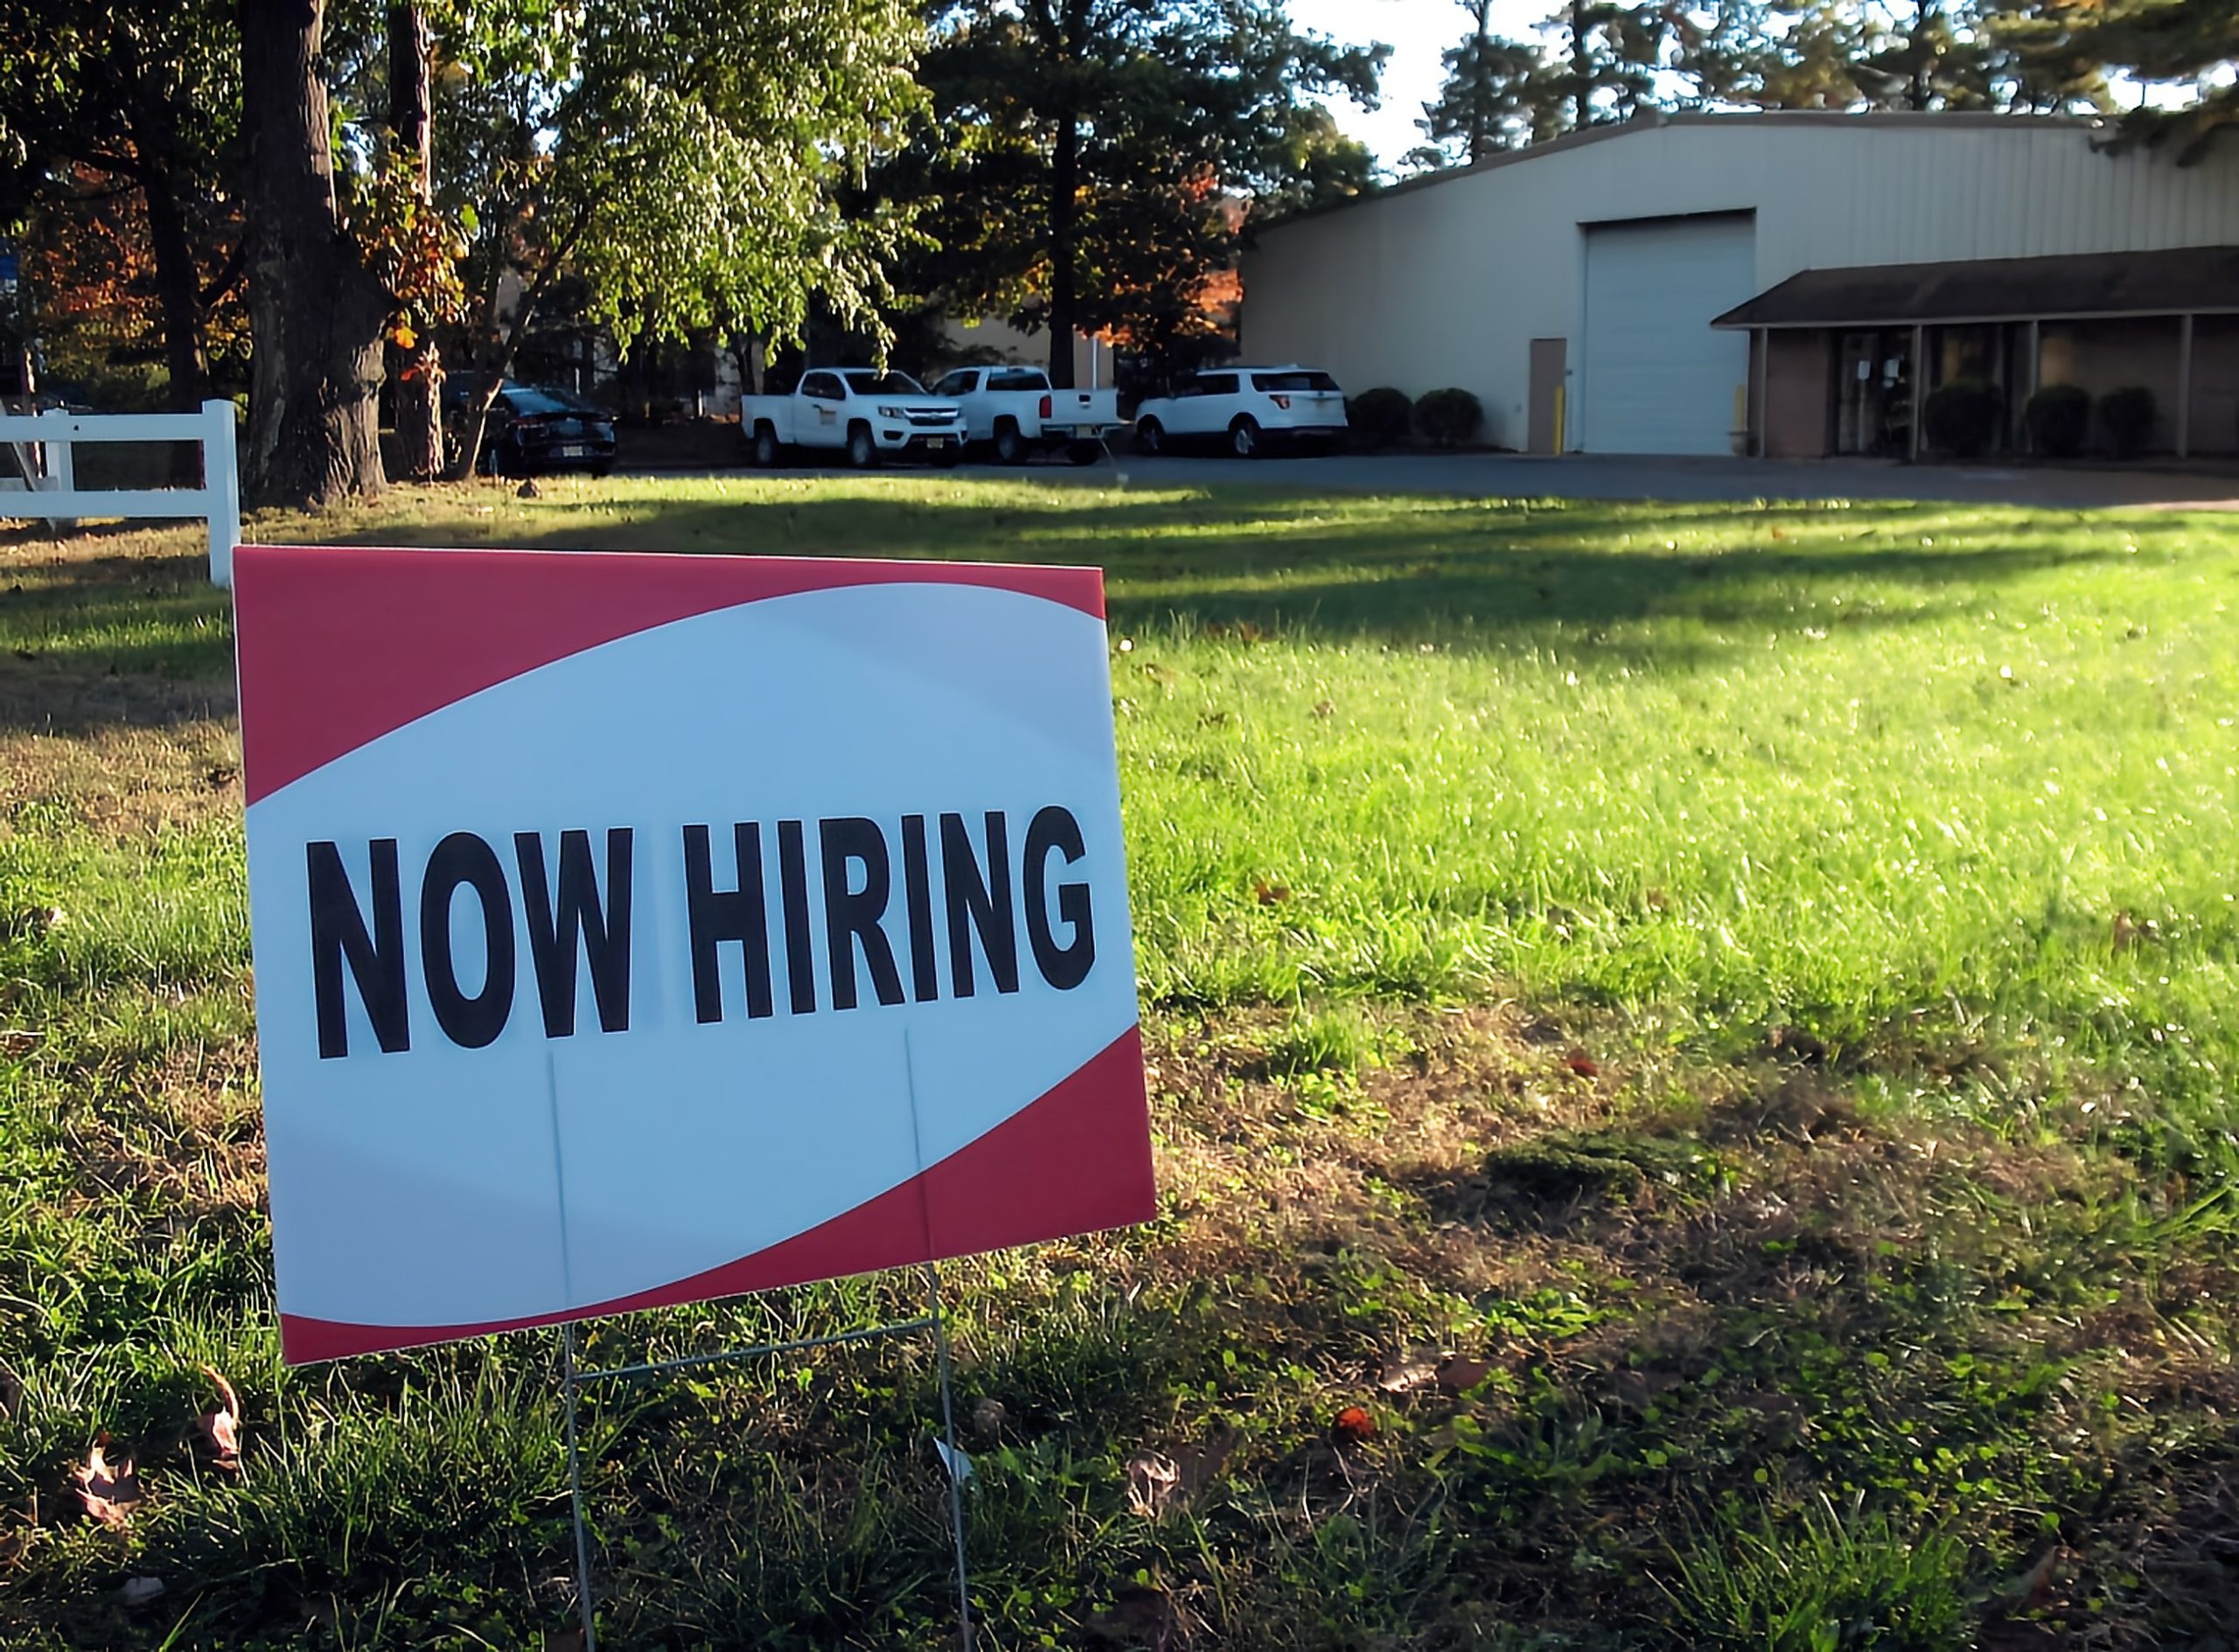 A now hiring sign outside a business